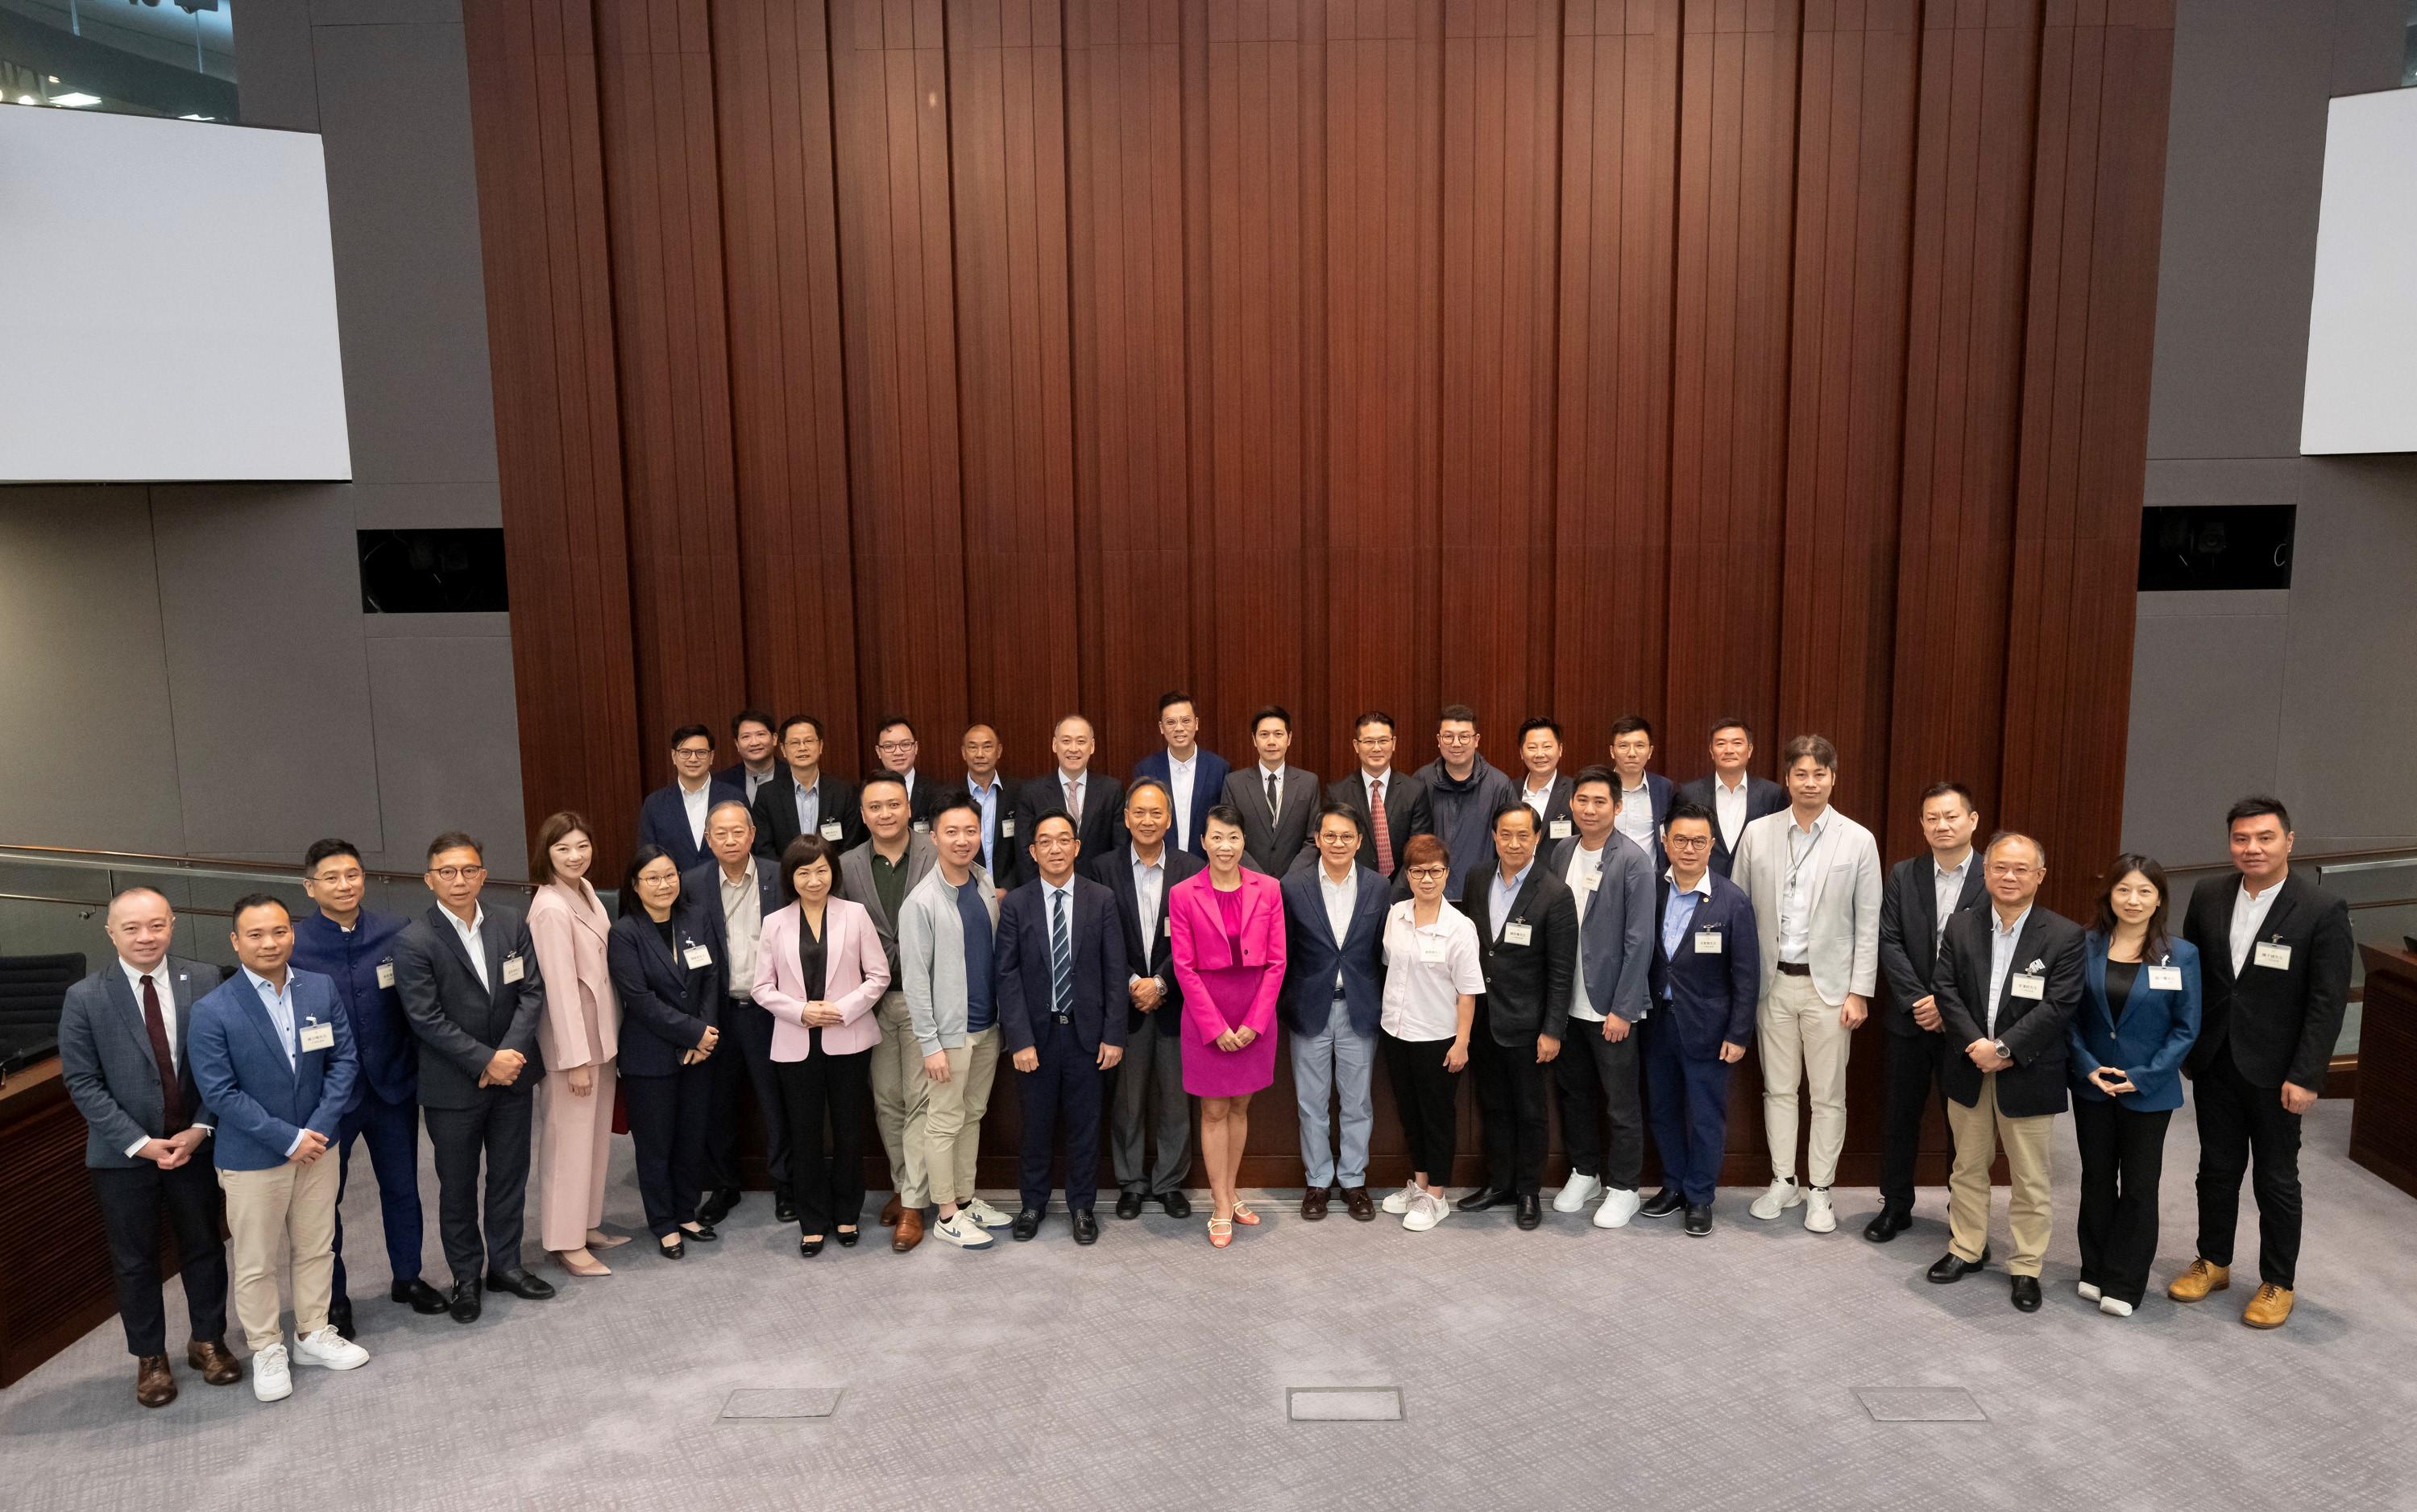 The Legislative Council (LegCo) Members meet with the new term Tai Po District Council (DC) and Central and Western DC members at the LegCo Complex today (May 31). Photo shows LegCo Members and members of the Tai Po DC posing for a group photo after the meeting.
